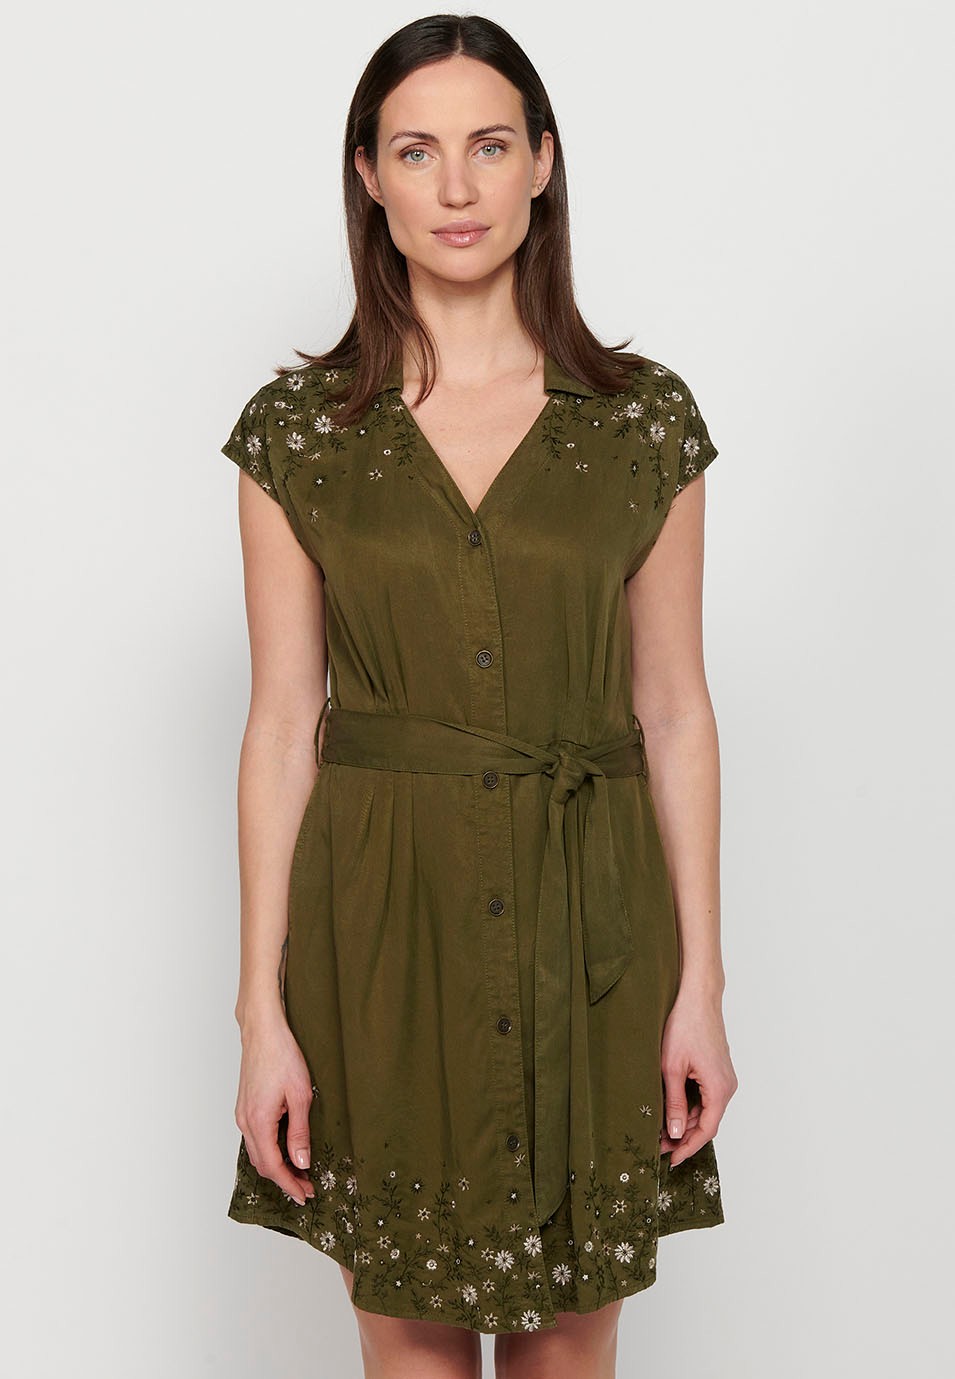 Short-sleeved midi dress with V-neckline and front button closure, fitted at the waist with embroidered details in Khaki color for Women 4